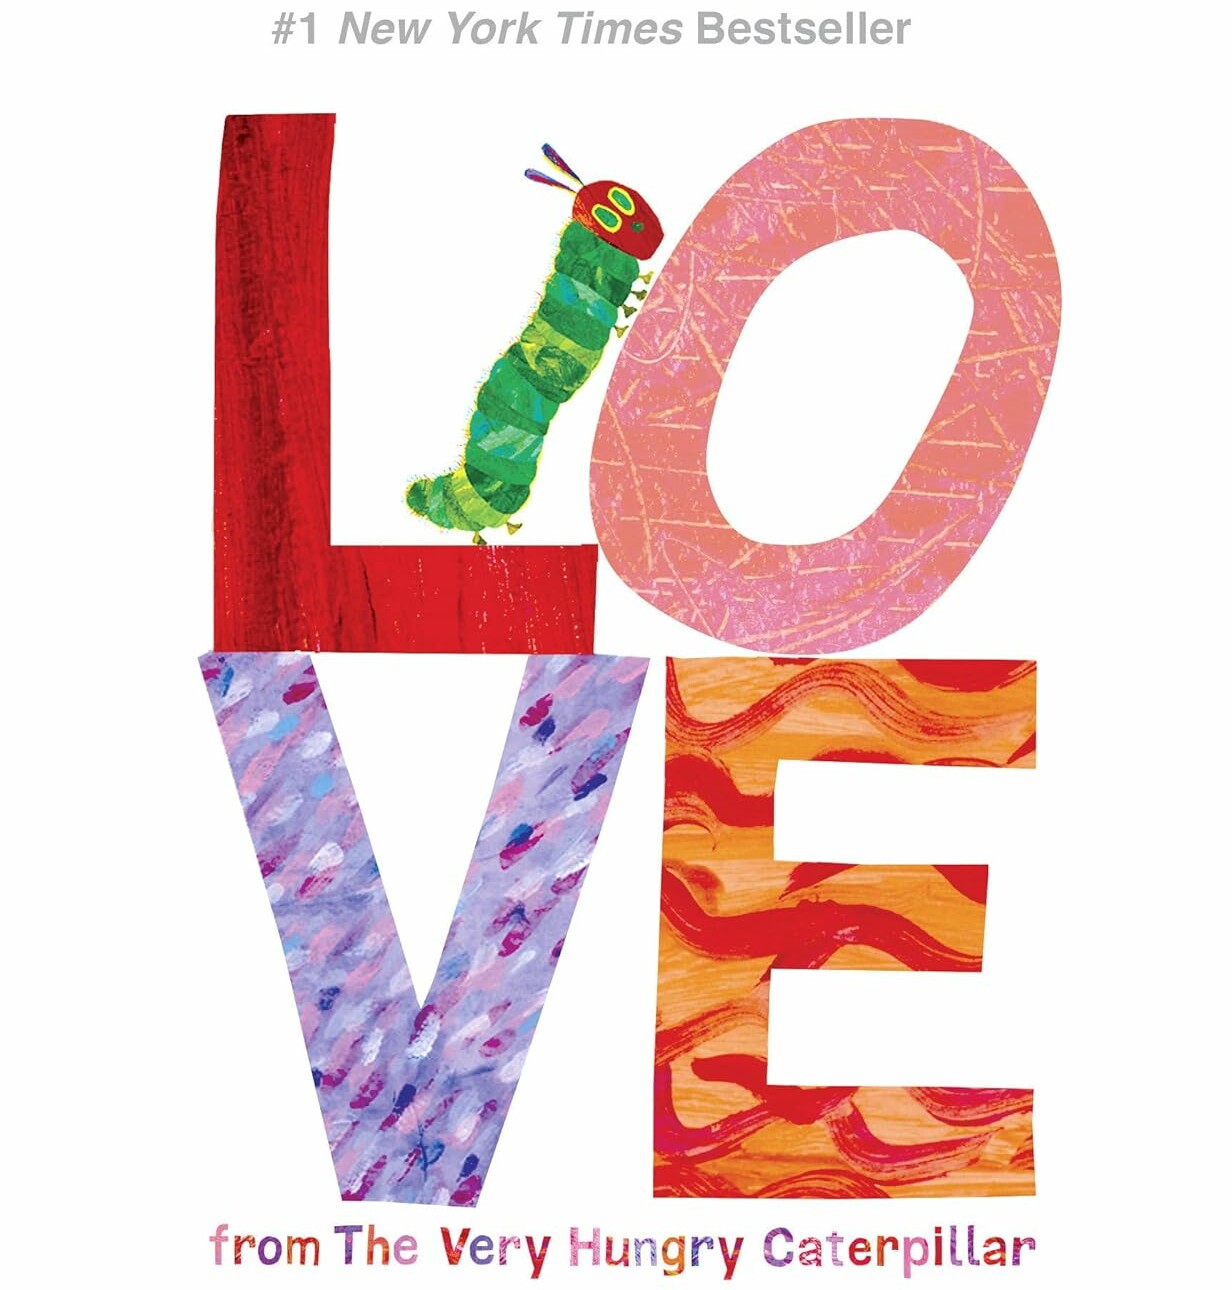 “Love from The Very Hungry Caterpillar” by Eric Carle